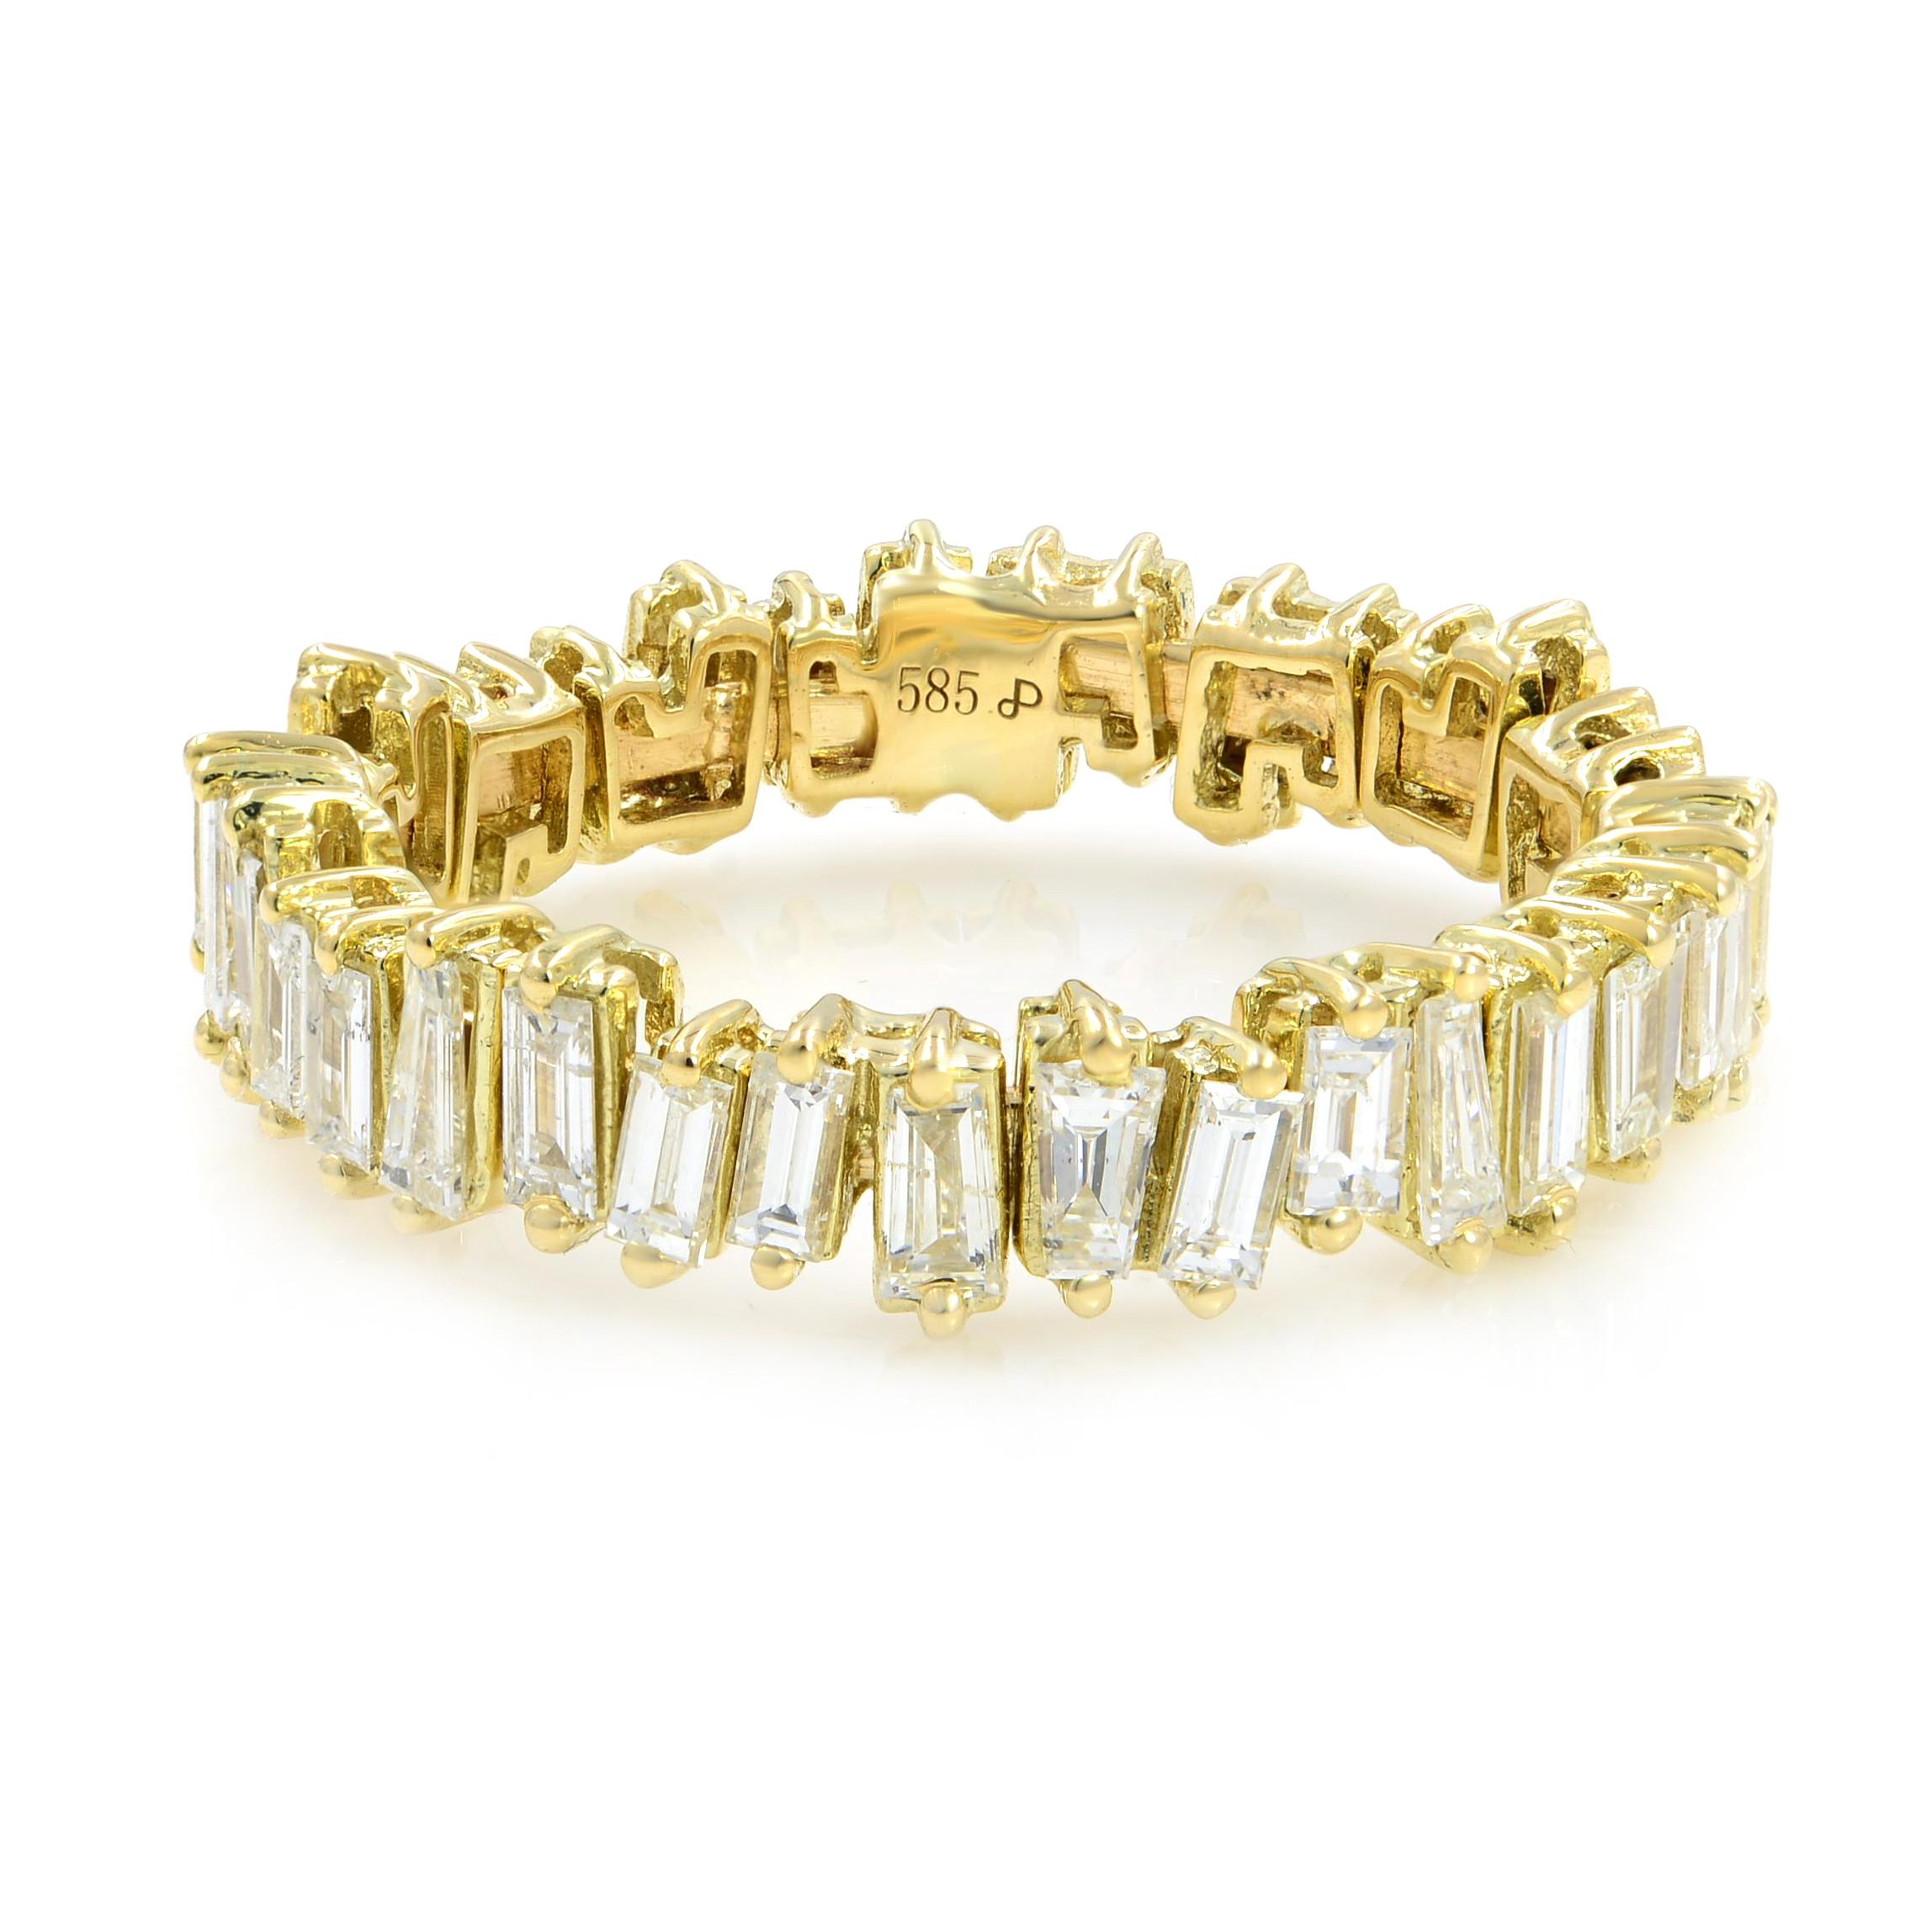 Rachel koen Baguette Diamond Eternity Band 14K Yellow Gold 0.67cttw In New Condition For Sale In New York, NY